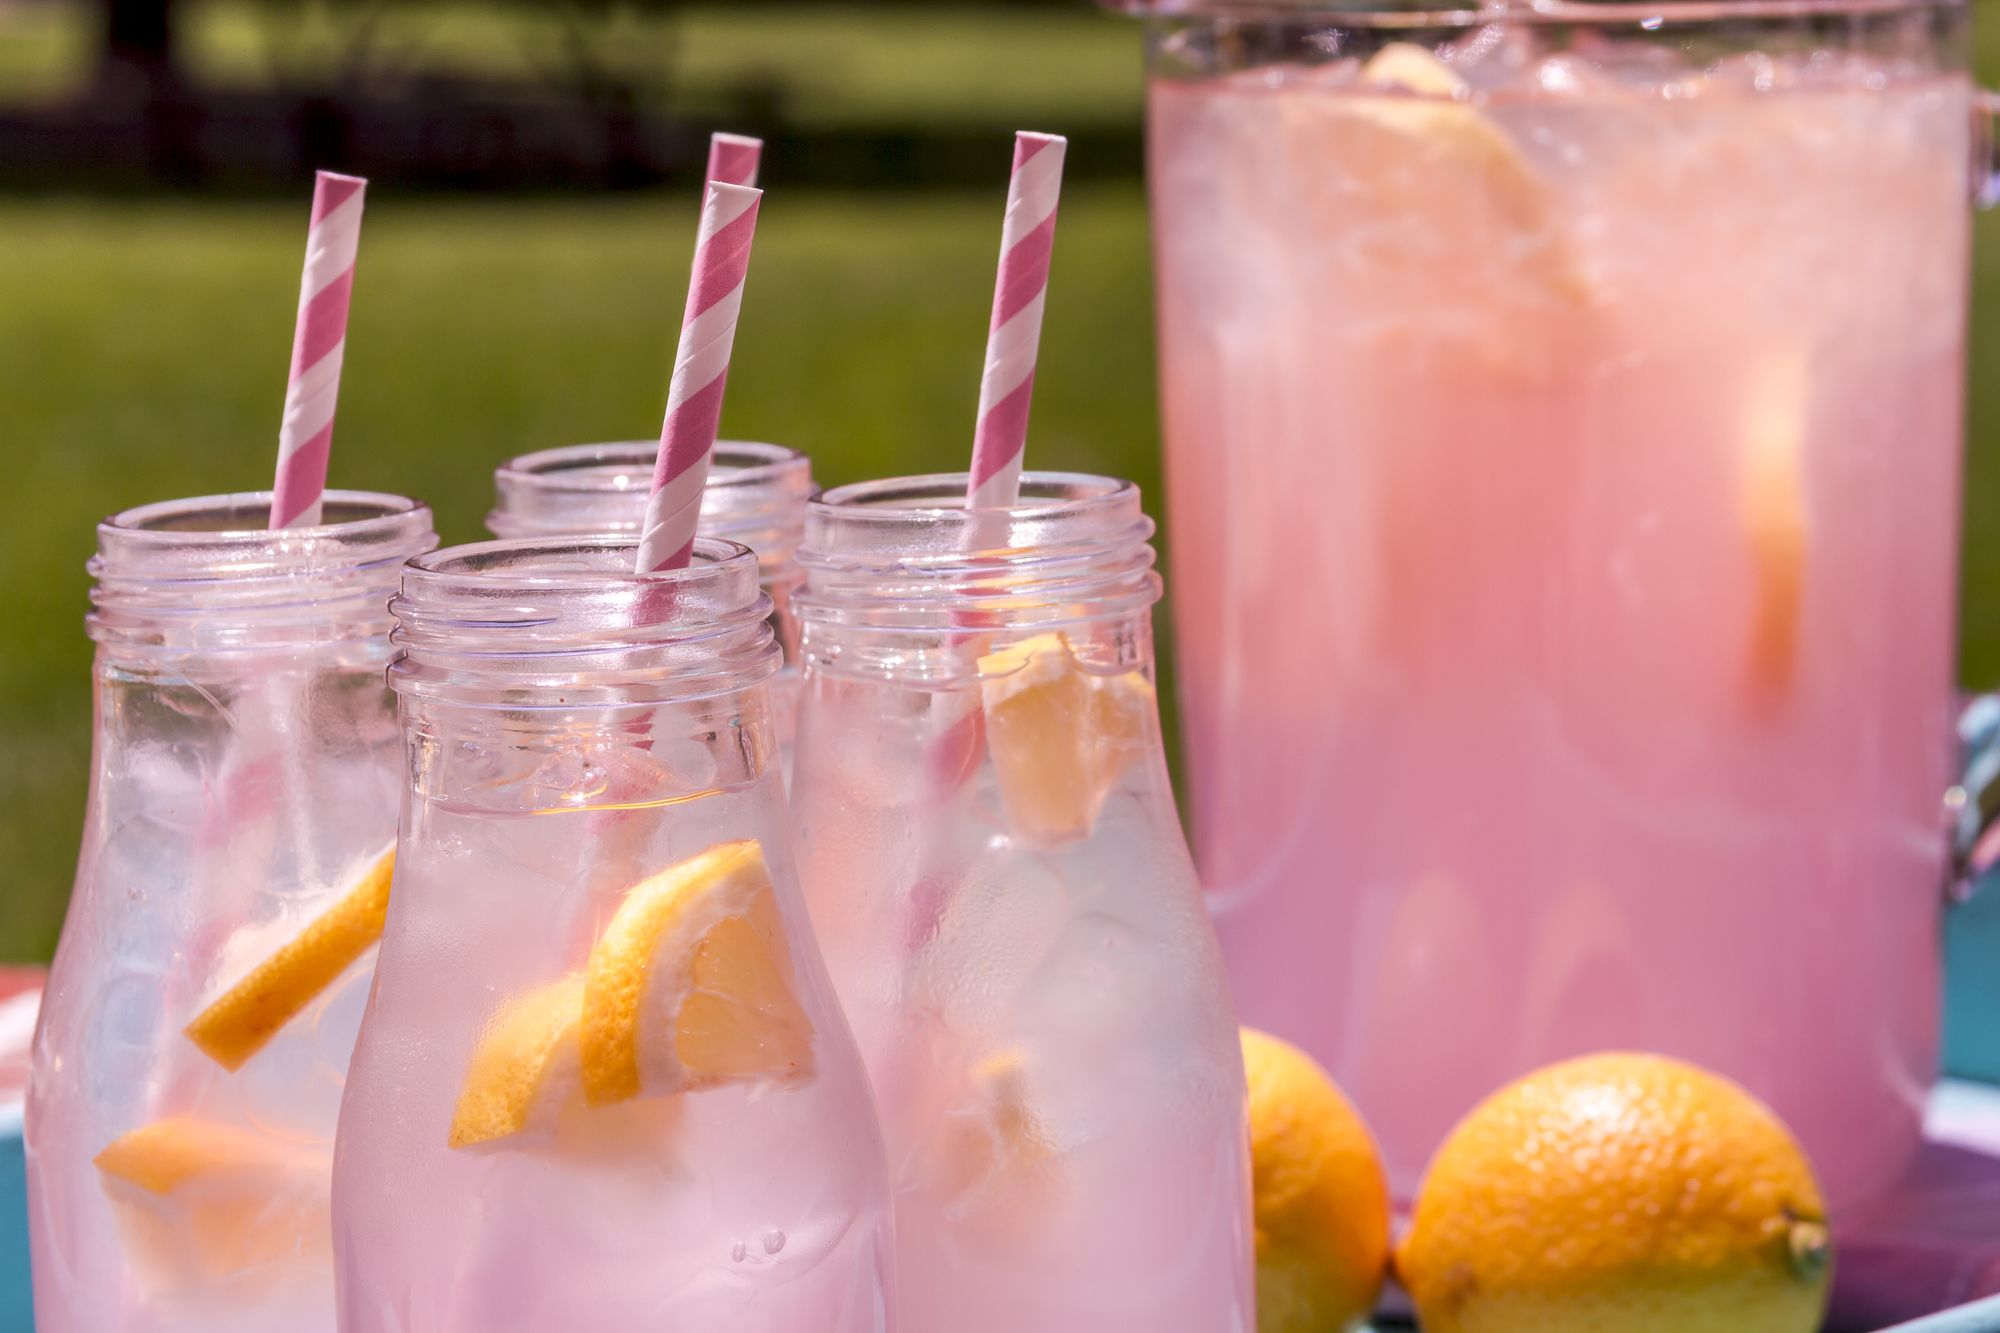 Lemonade recipes that help reduce headaches and anxiety